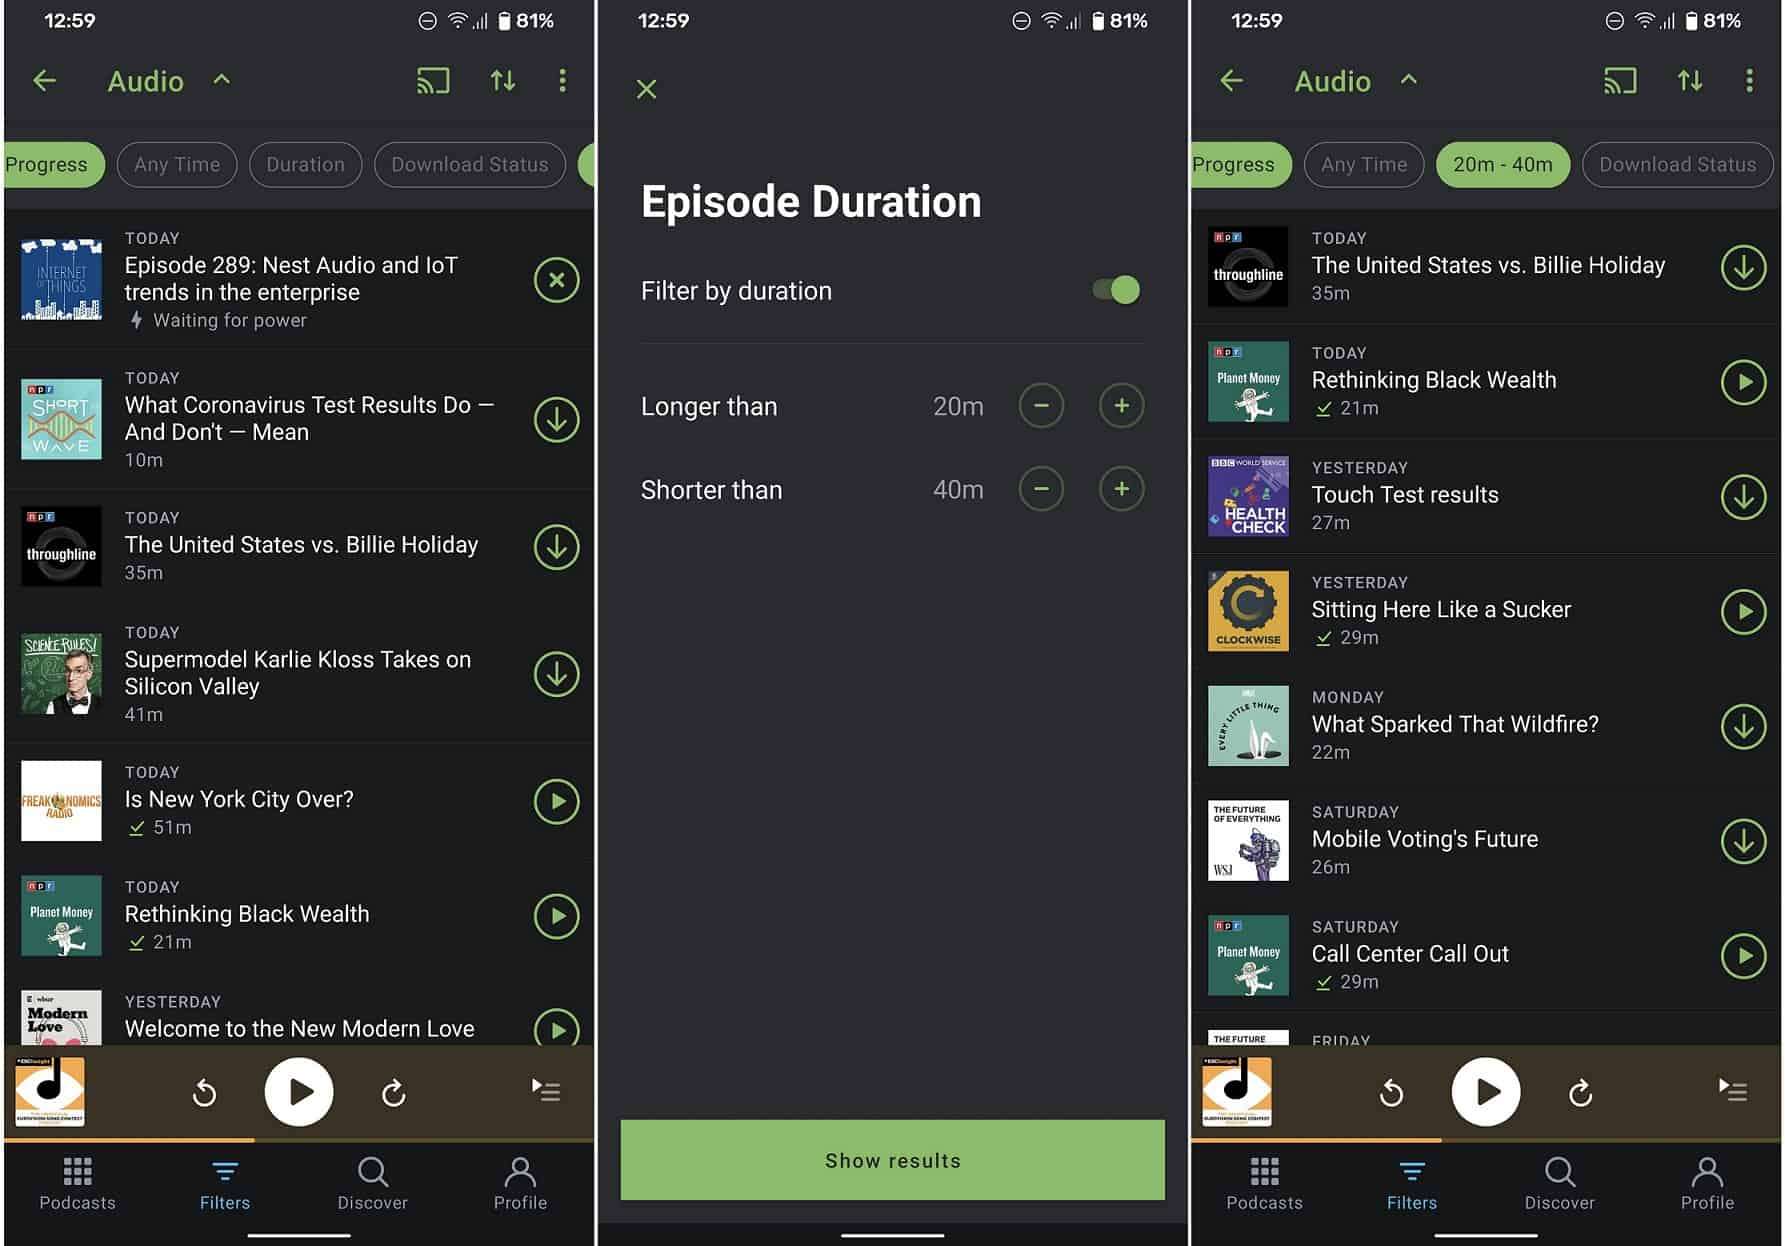 Learn How to Listen to Podcasts on the Pocket Casts App